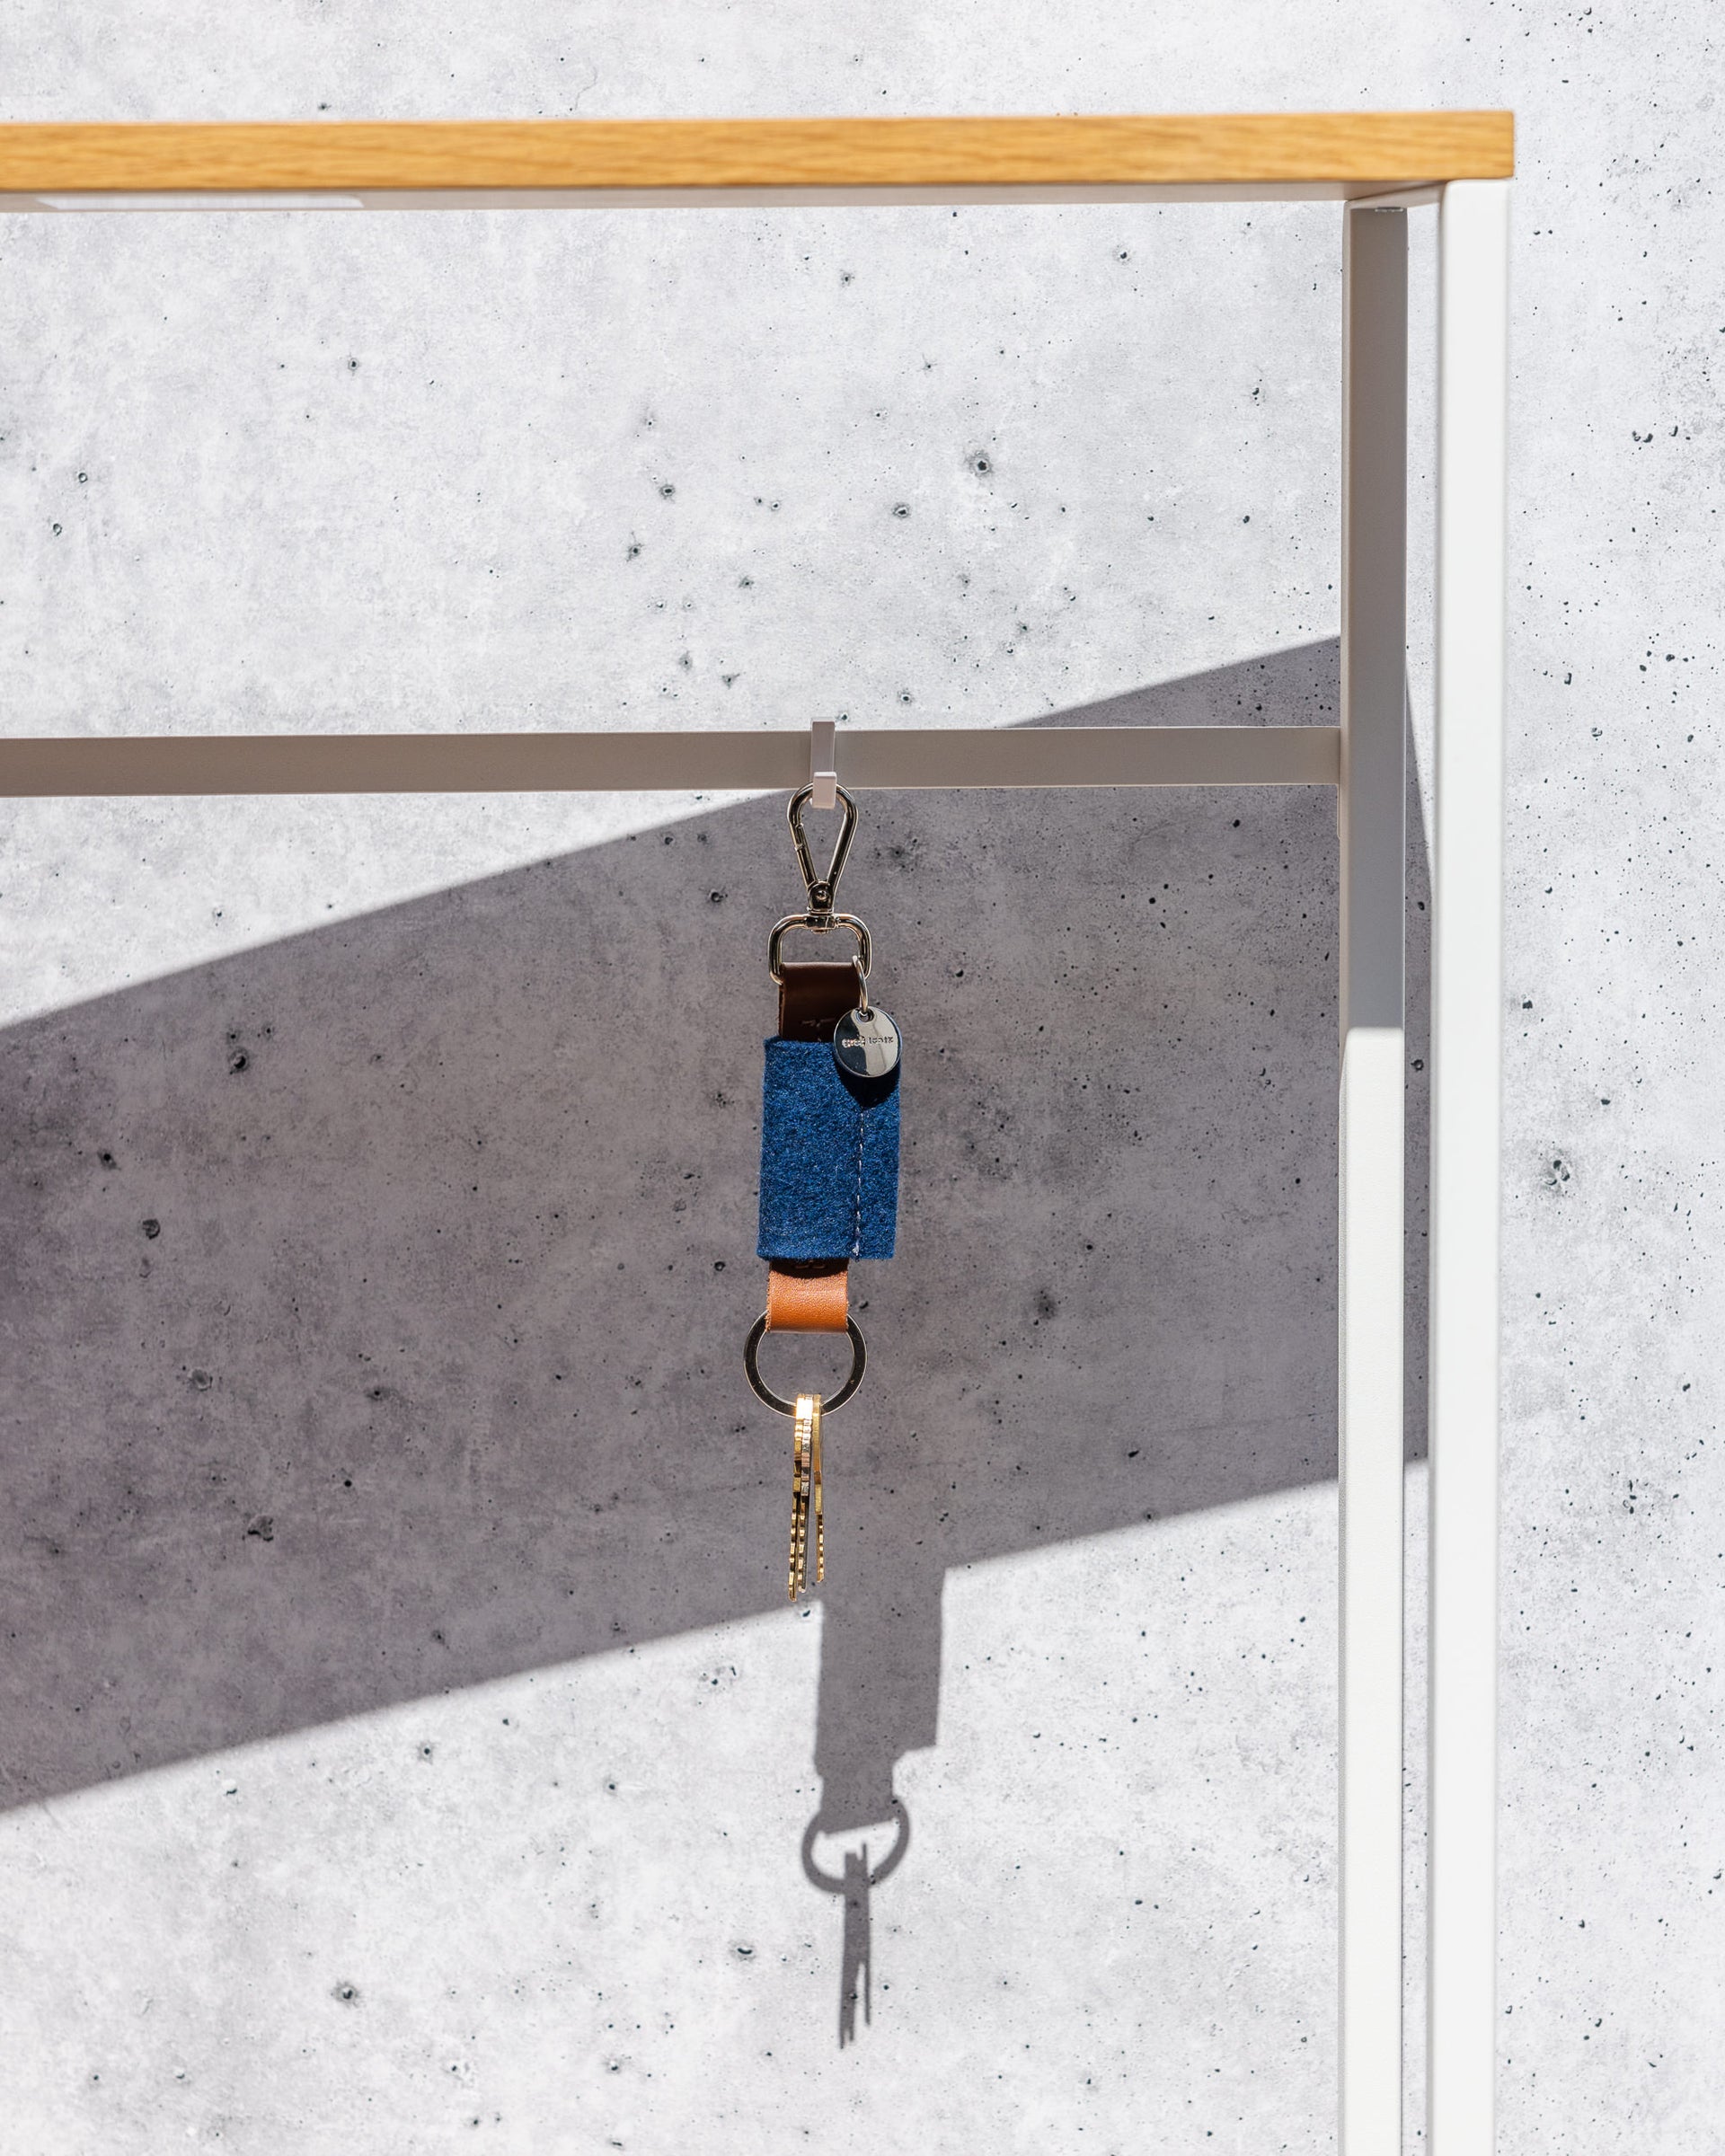 Merino Wool Bar Key Fob in blue with silver colored key ring with keys and  brown leather application hanging on a wardrobe in front of gray stone wall